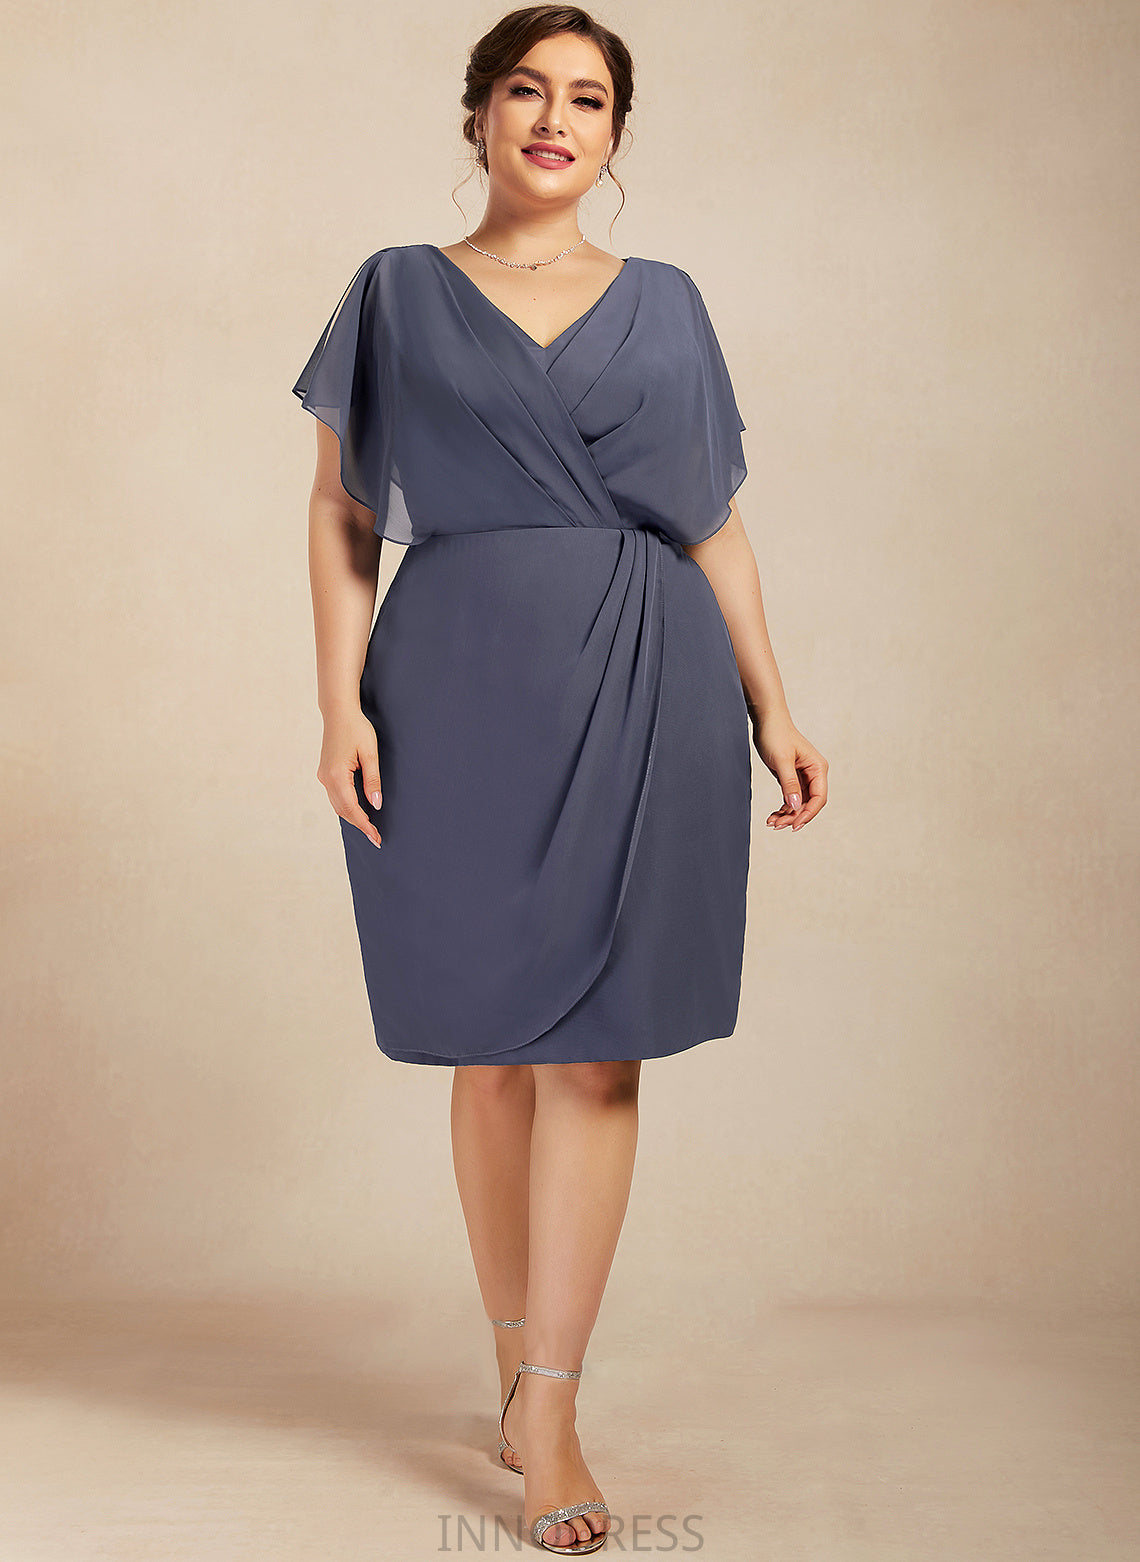 Eleanor the With Mother of the Bride Dresses Sheath/Column Dress Knee-Length of Ruffle Chiffon Bride Mother V-neck